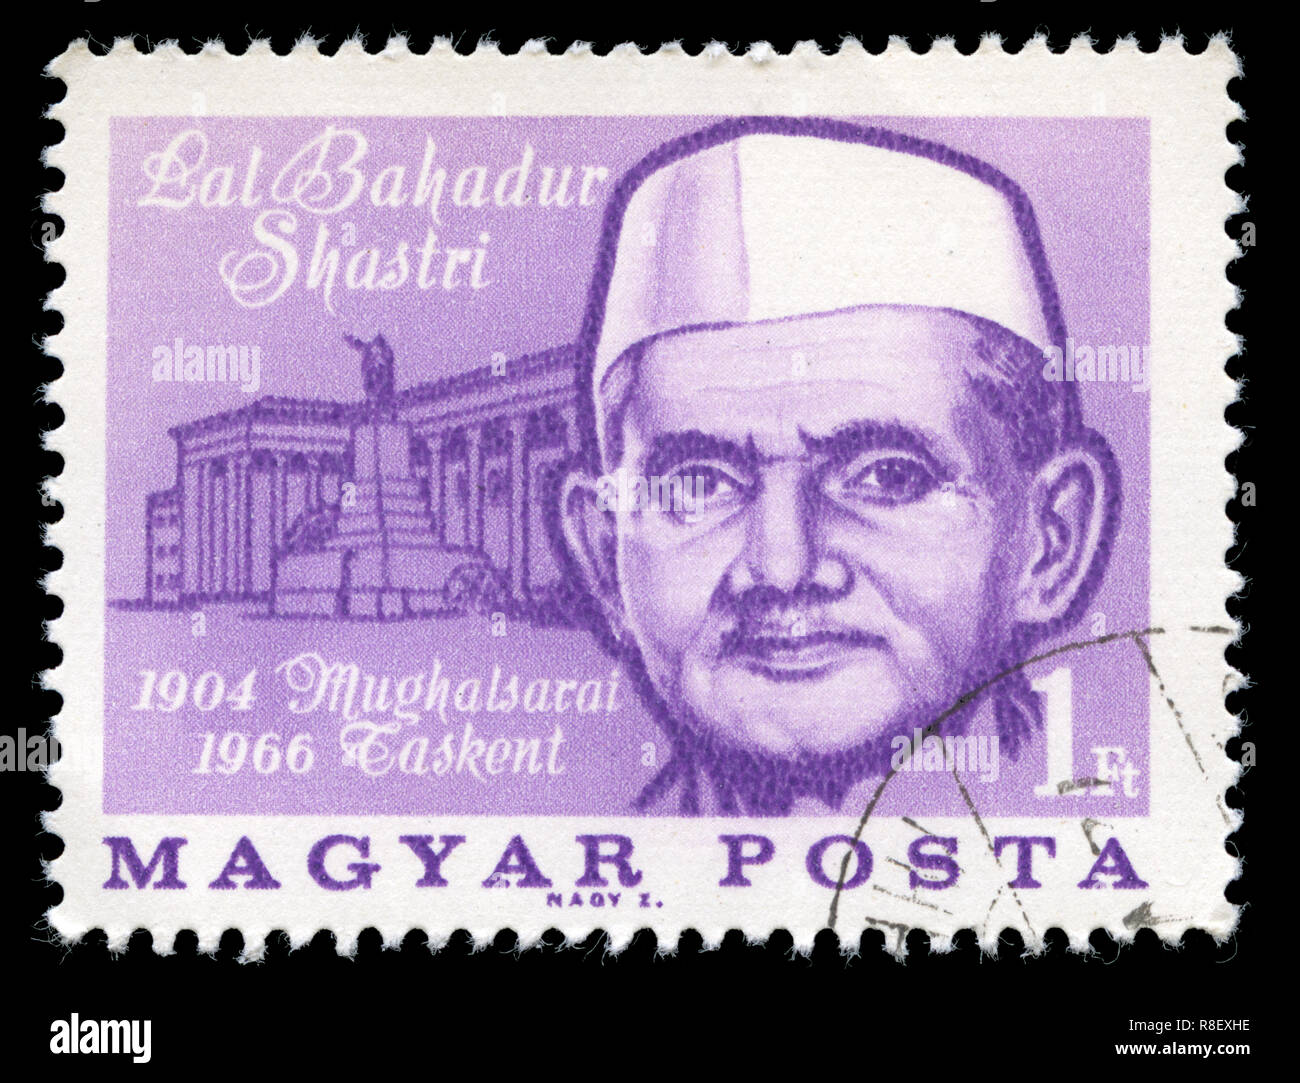 Postage stamp from Hungary in the Personalities series issued in 1966 Stock Photo